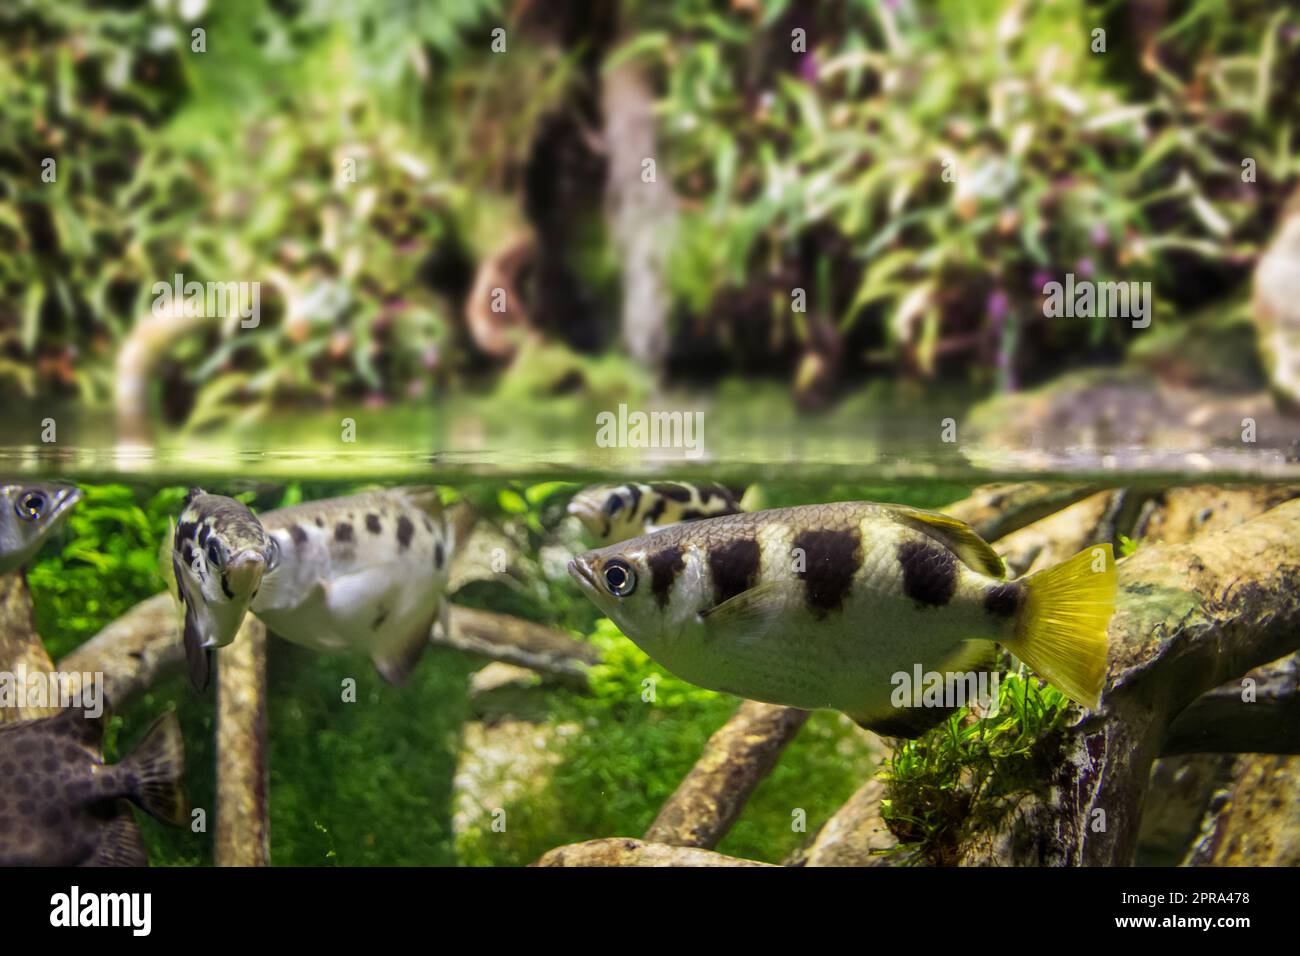 Banded archerfish close-up view in mangrove water Stock Photo